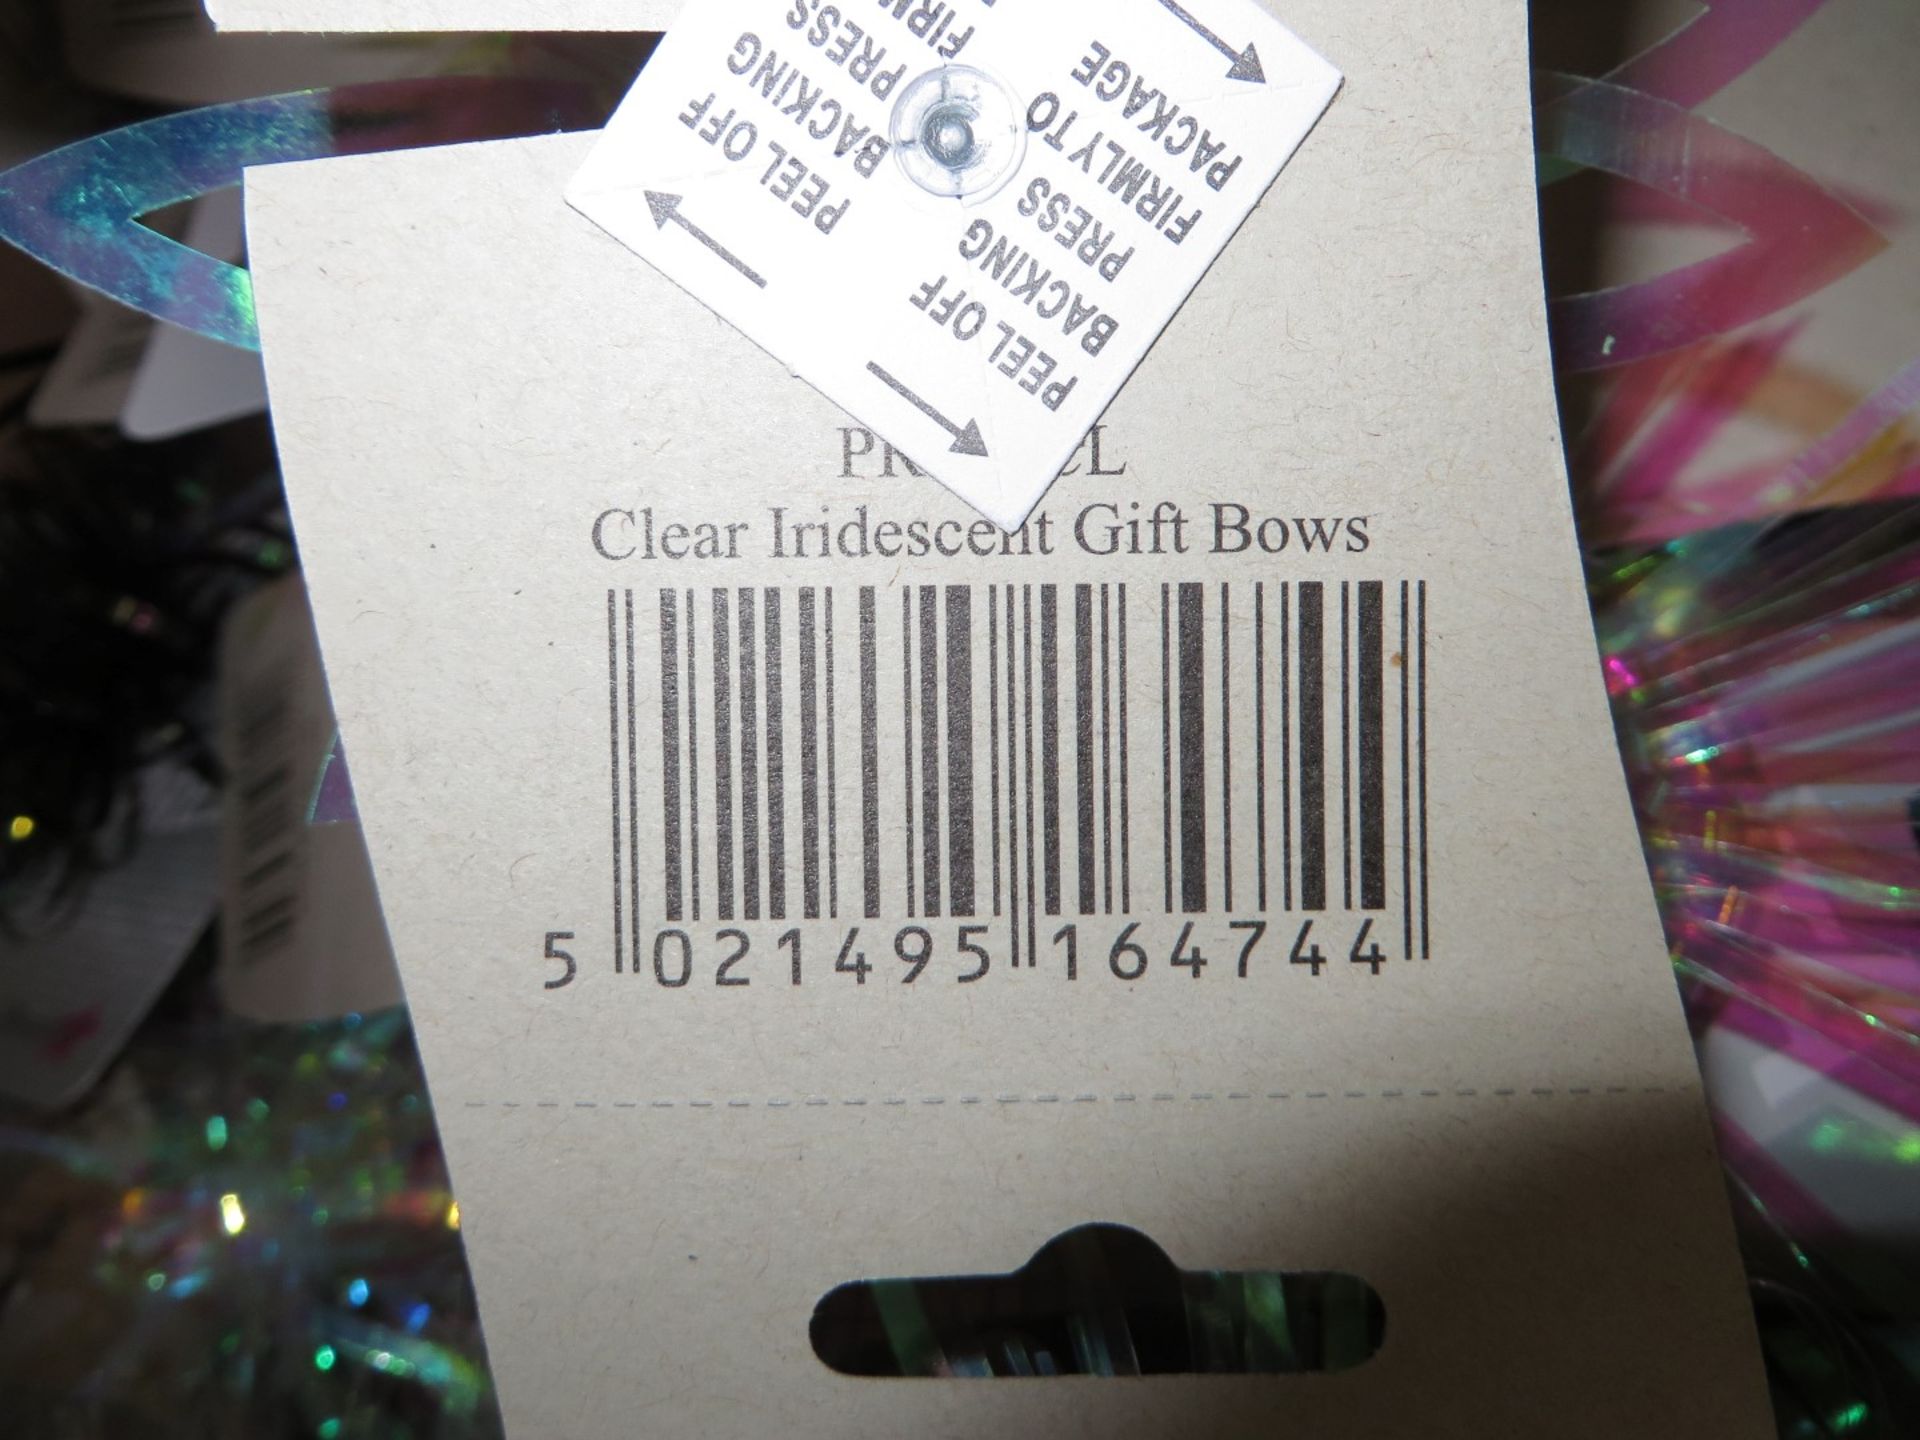 1 x Large Box of New Self-Adhesive Iridescent Present Bows - CL185 - Ref: DSY0256 - Location: Stoke- - Image 5 of 6